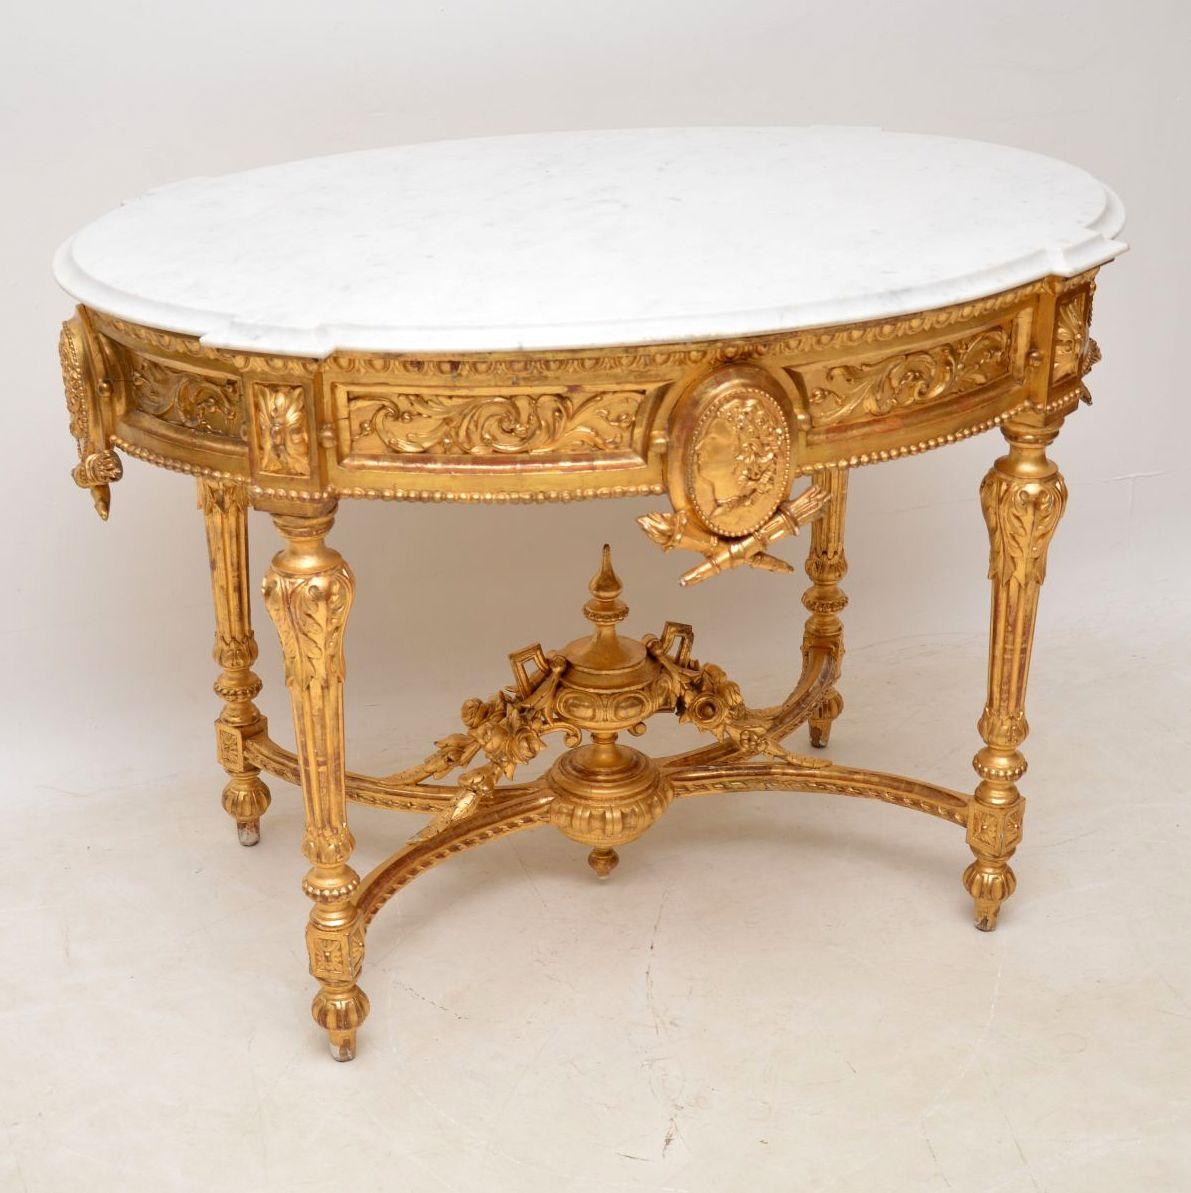 Very impressive & ornate large marble top gilt wood centre table or side table. It’s antique French, in good original condition, with some minor damage which we have tried to show in the images, so please enlarge them all. The marble top has a small